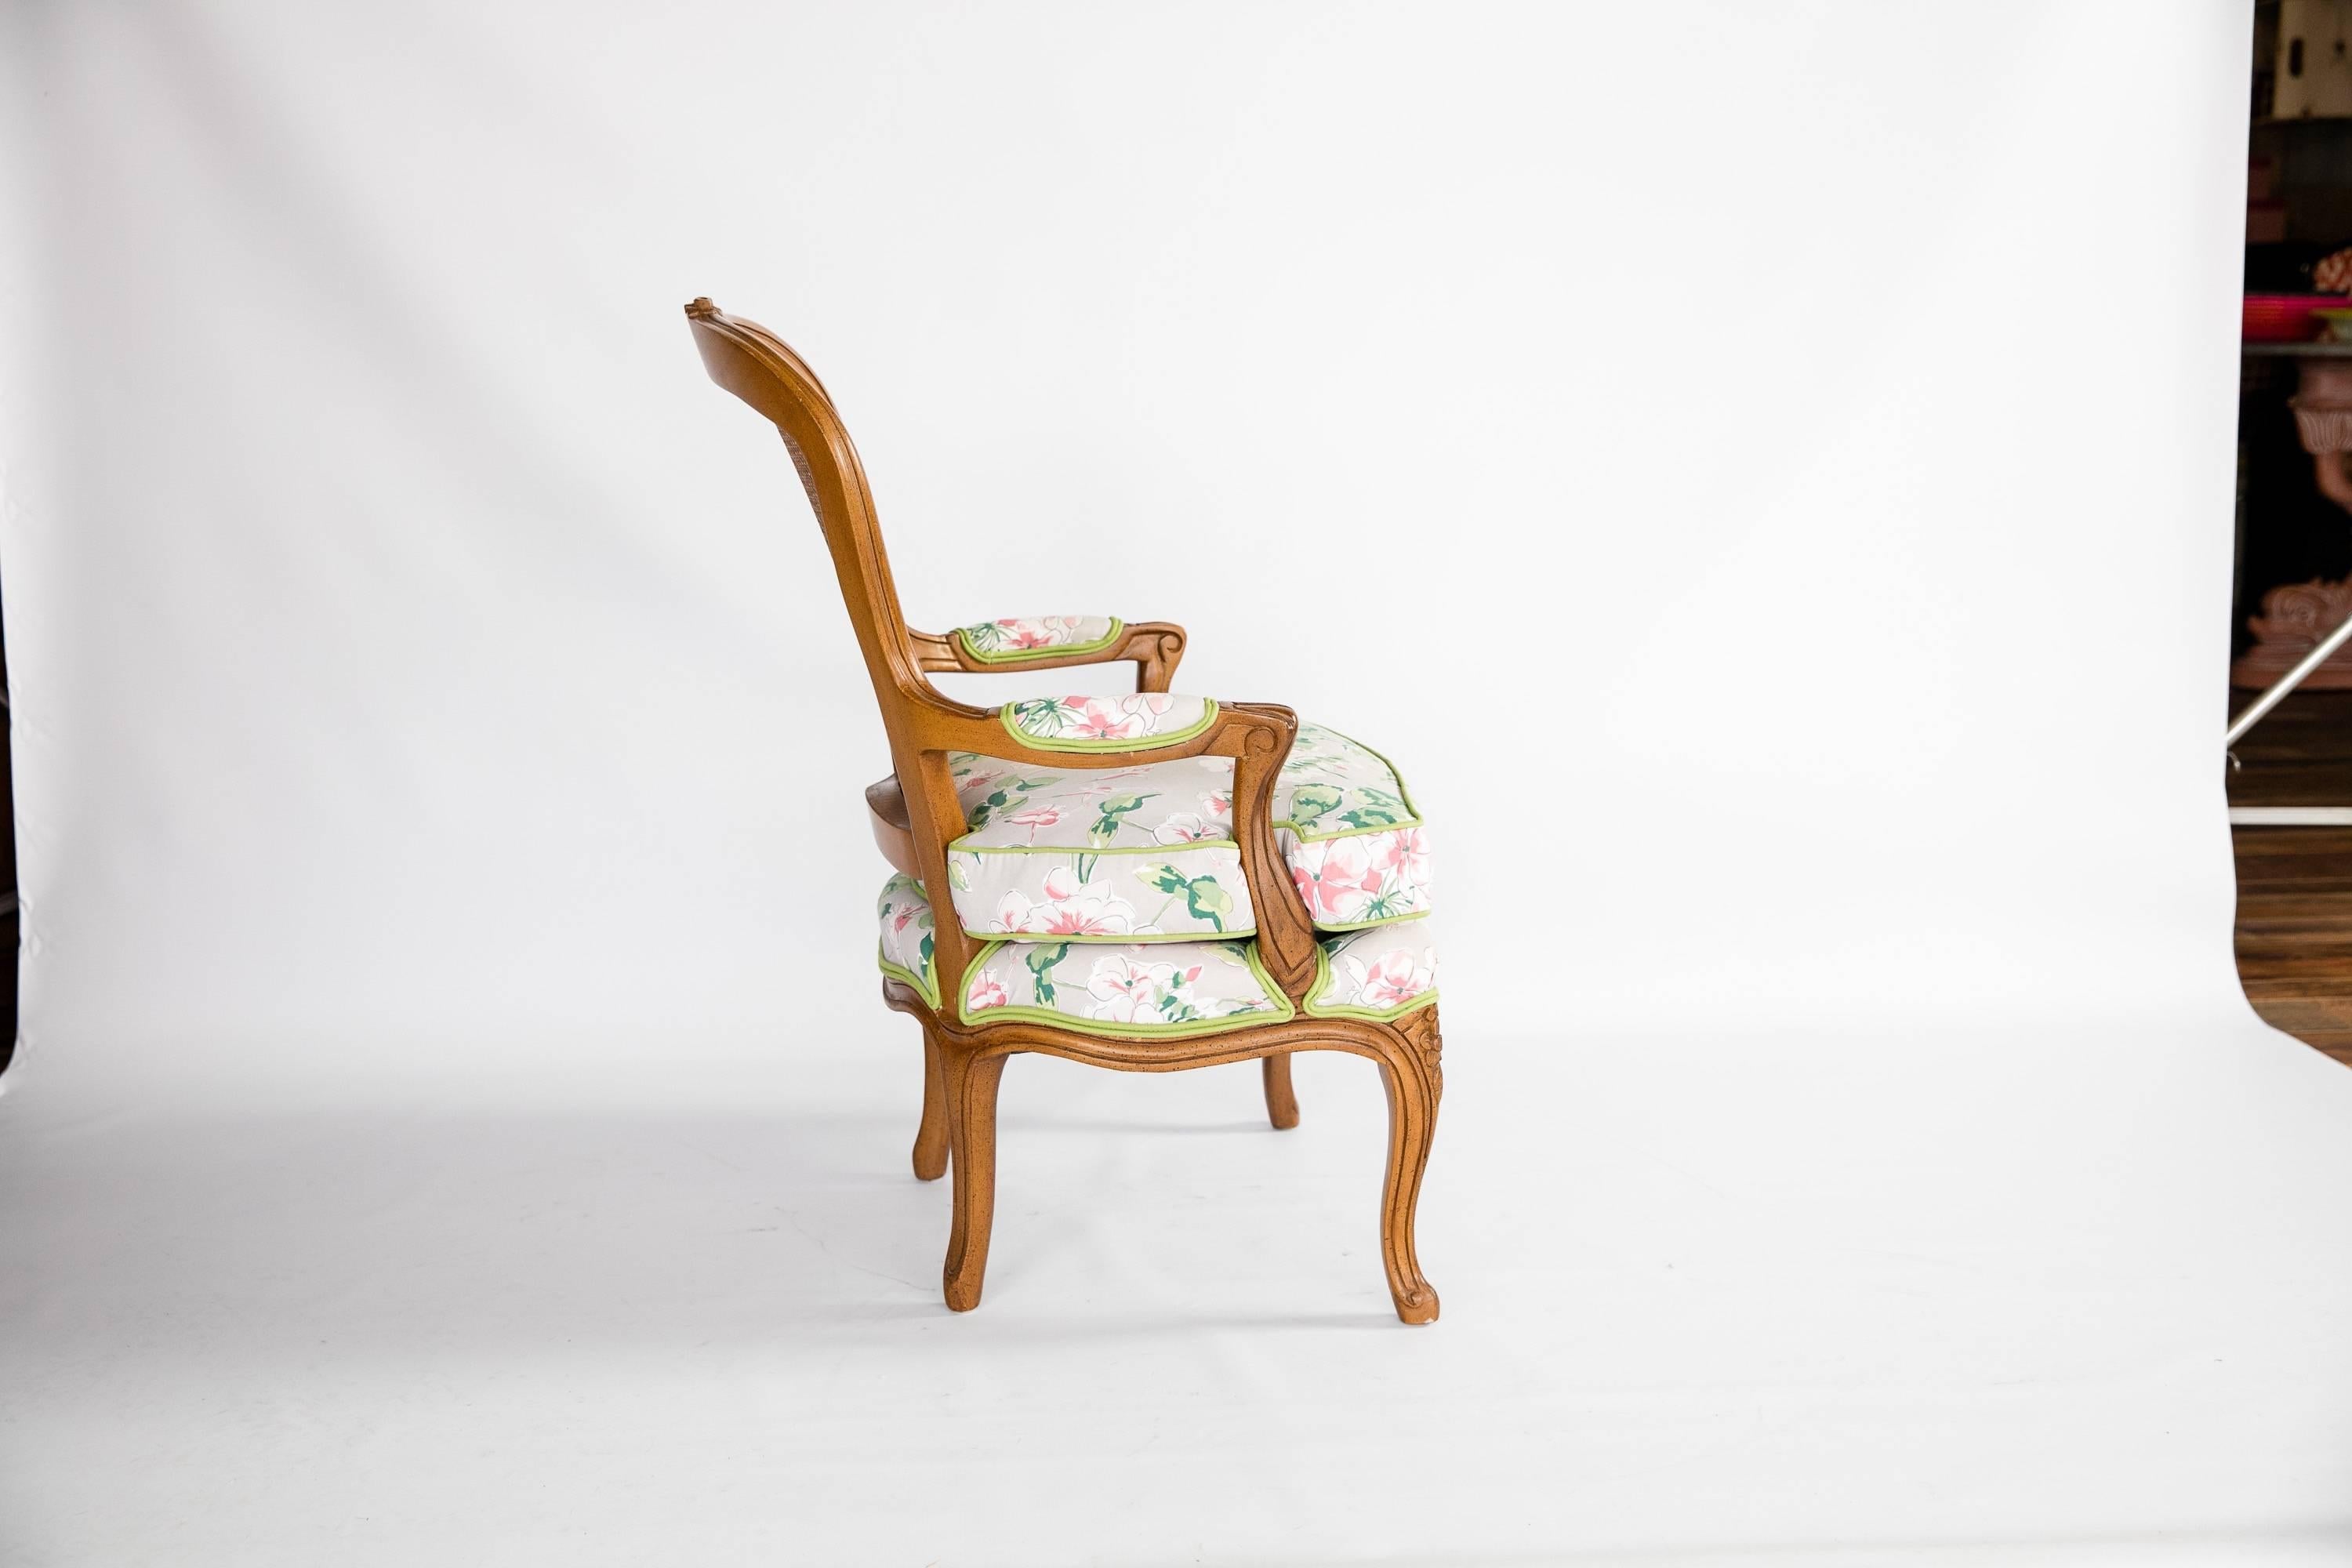 French Provincial Bergere Chair with Floral Upholstery, 1960s For Sale